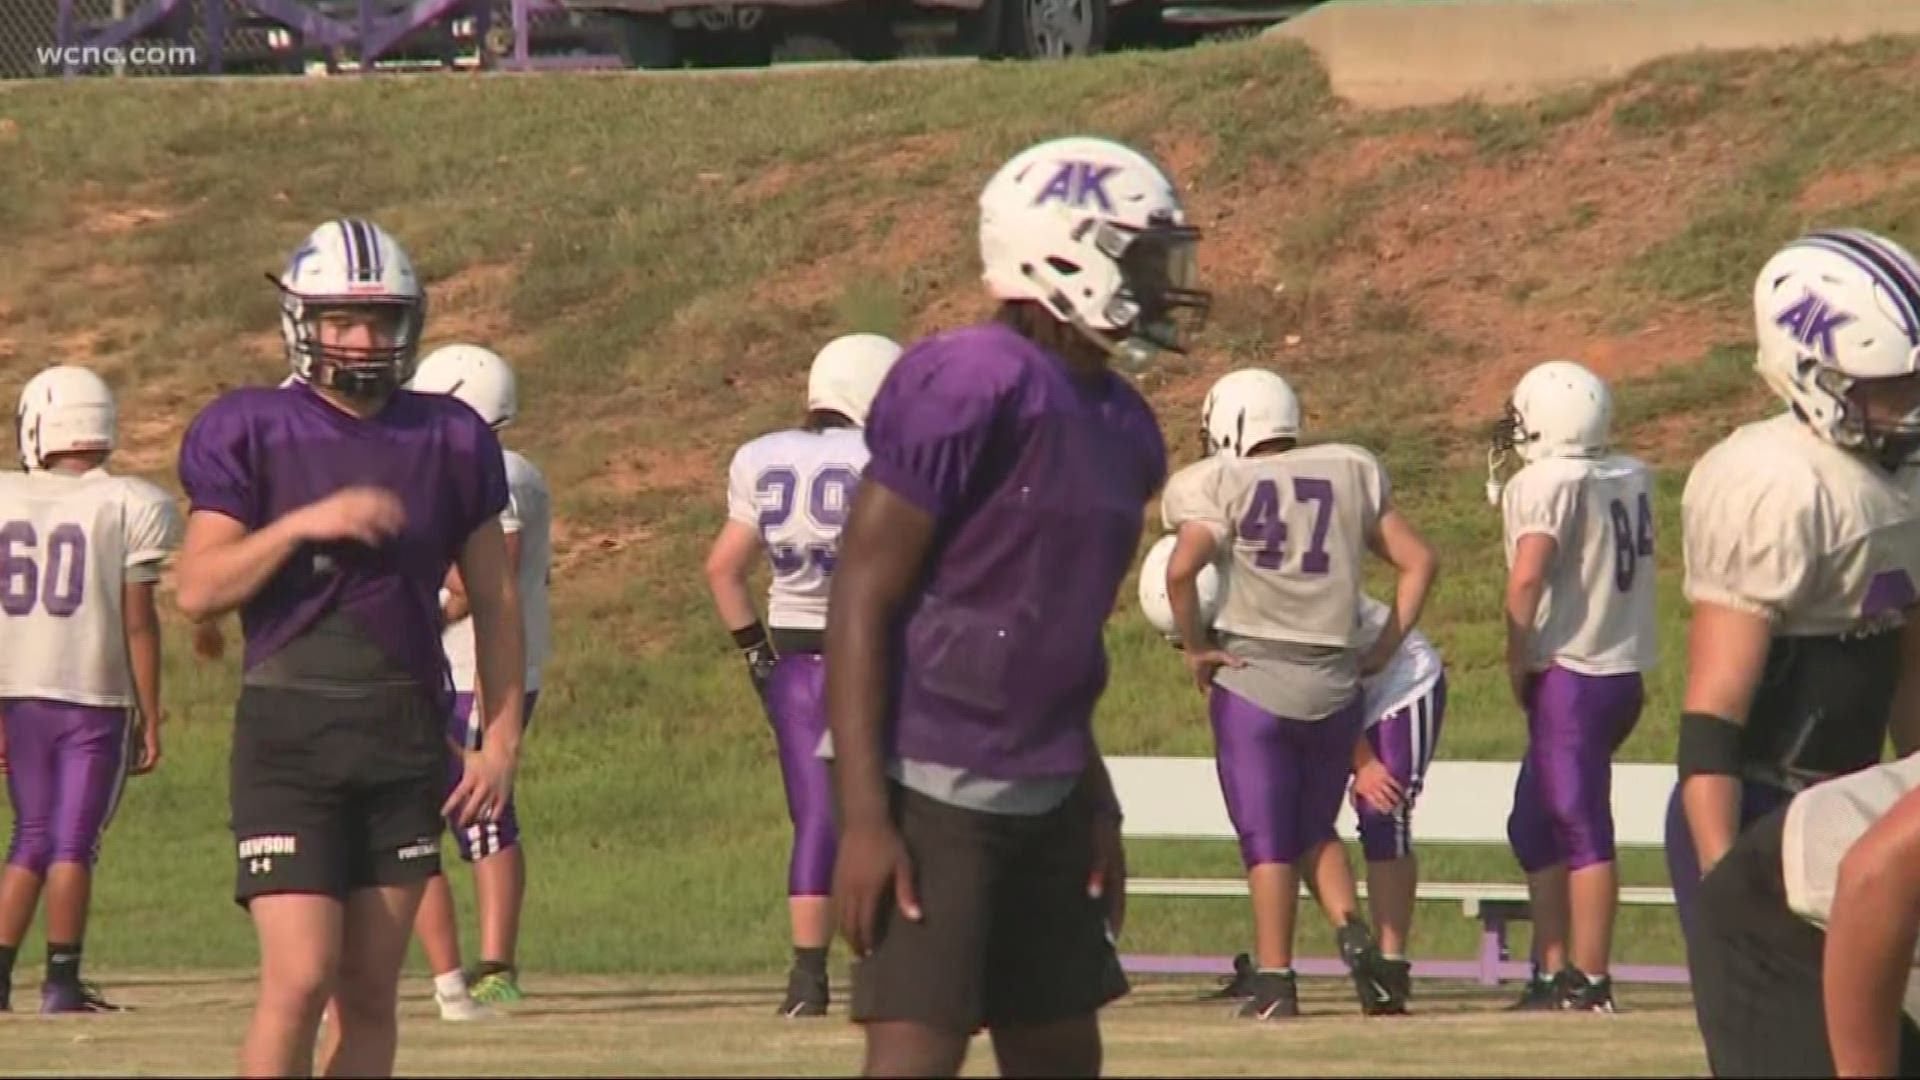 This week's student-athlete of the week takes us to Ardrey Kell High School where NBC Charlotte talked with the Knight's star quarterback.